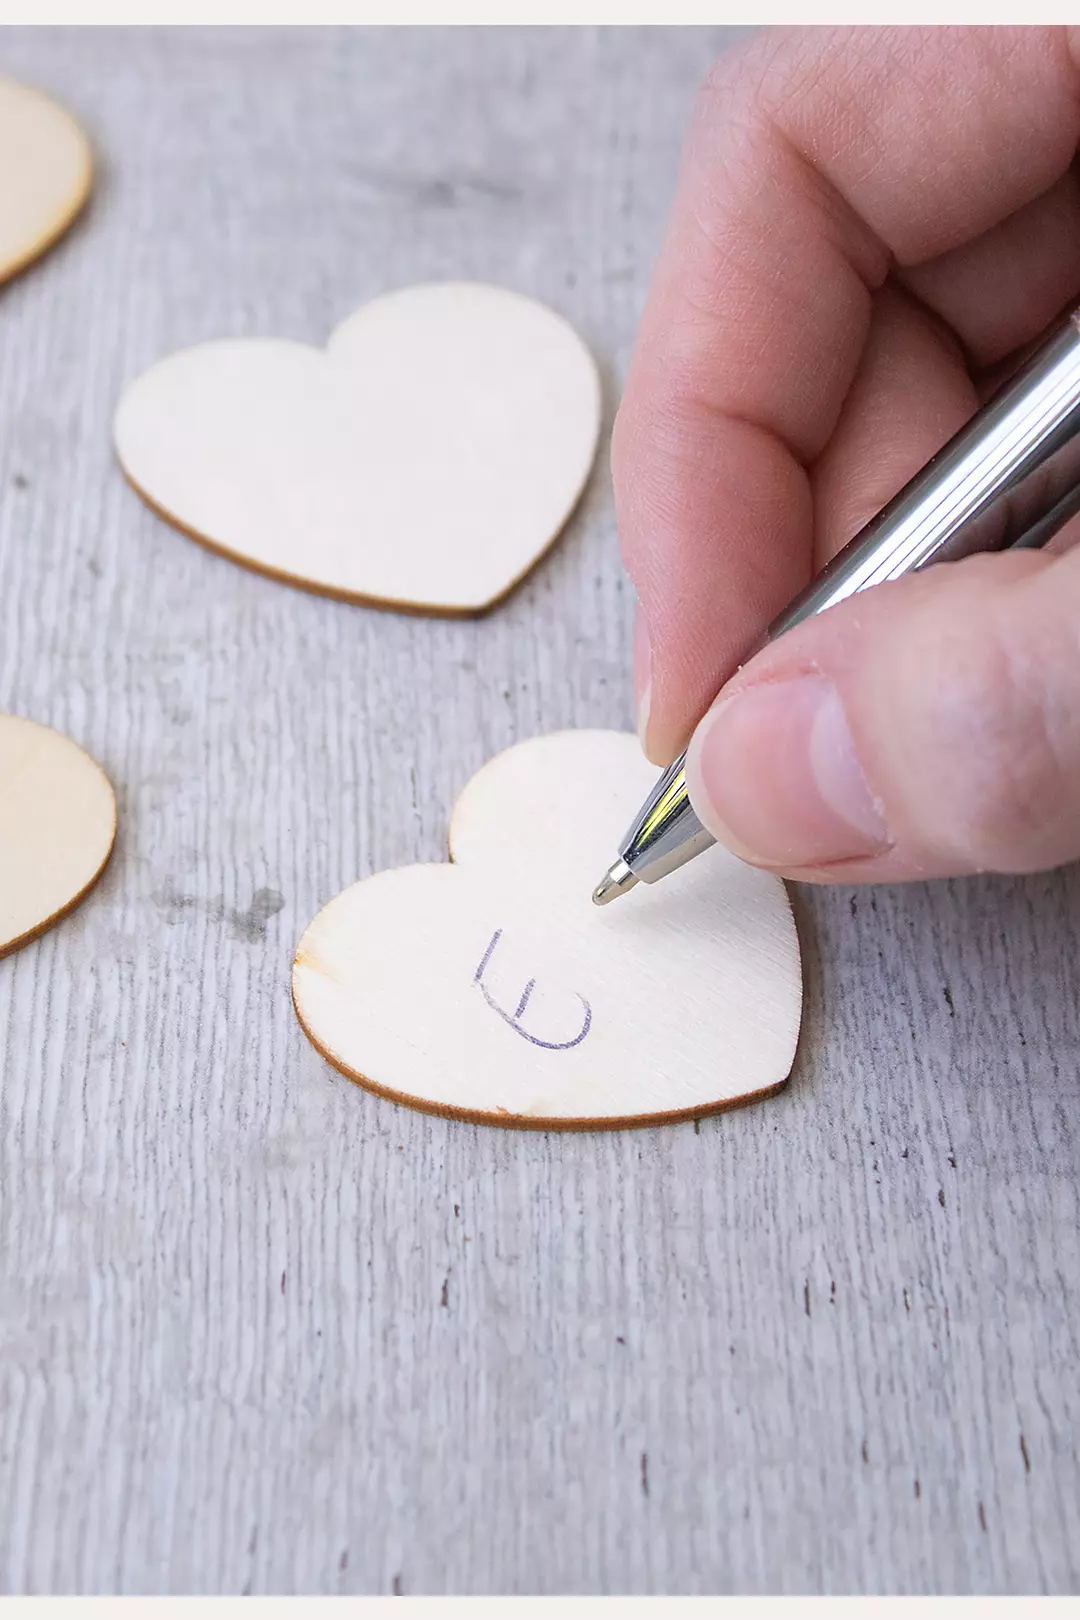 Wooden Hearts for Guest Book Alternative Image